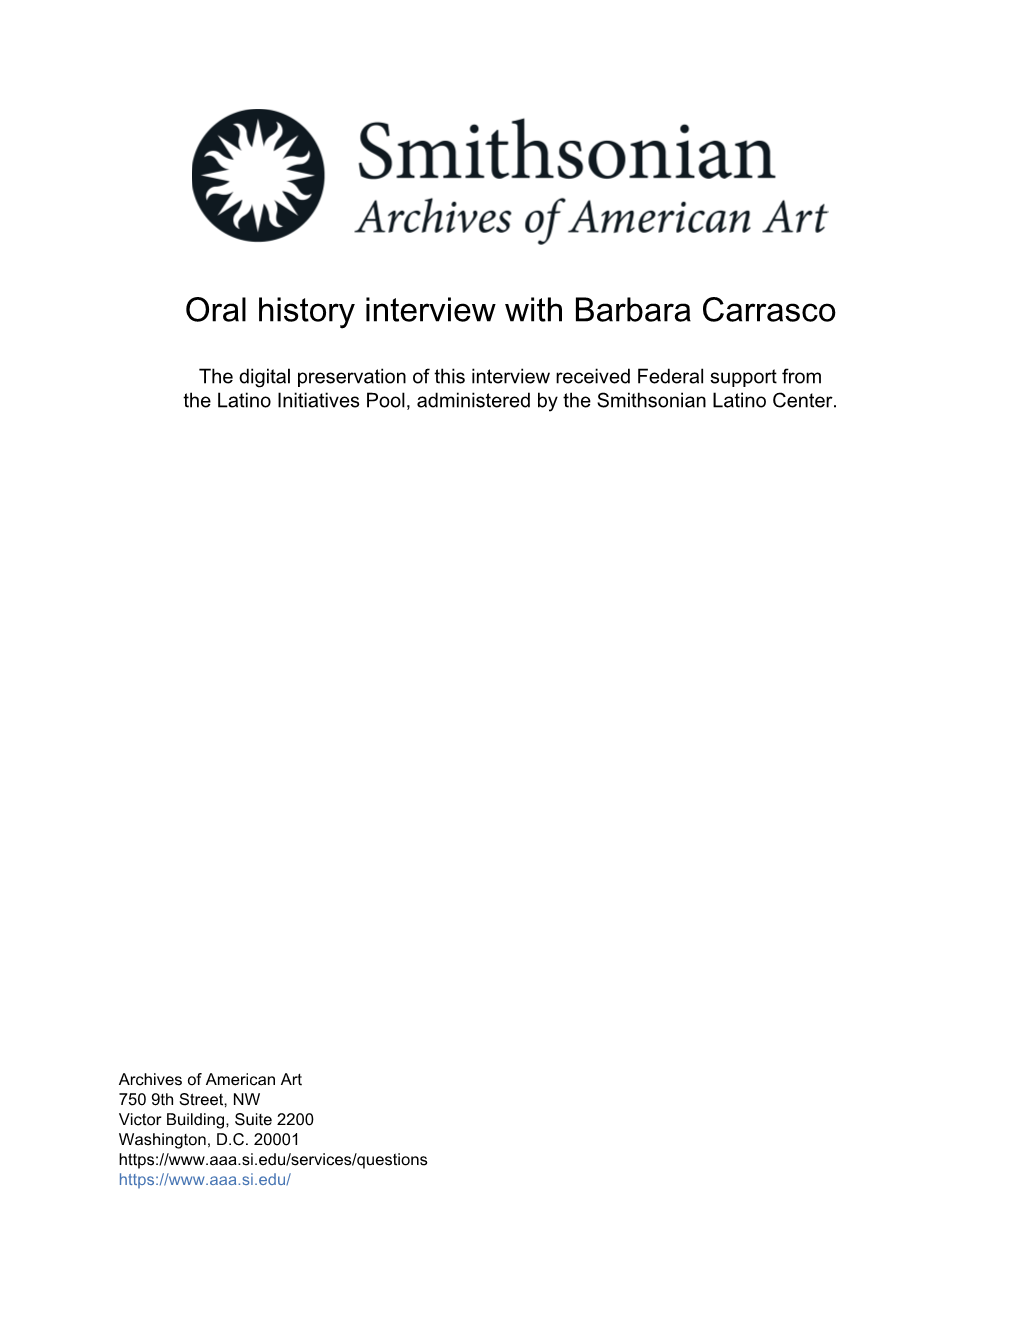 Oral History Interview with Barbara Carrasco